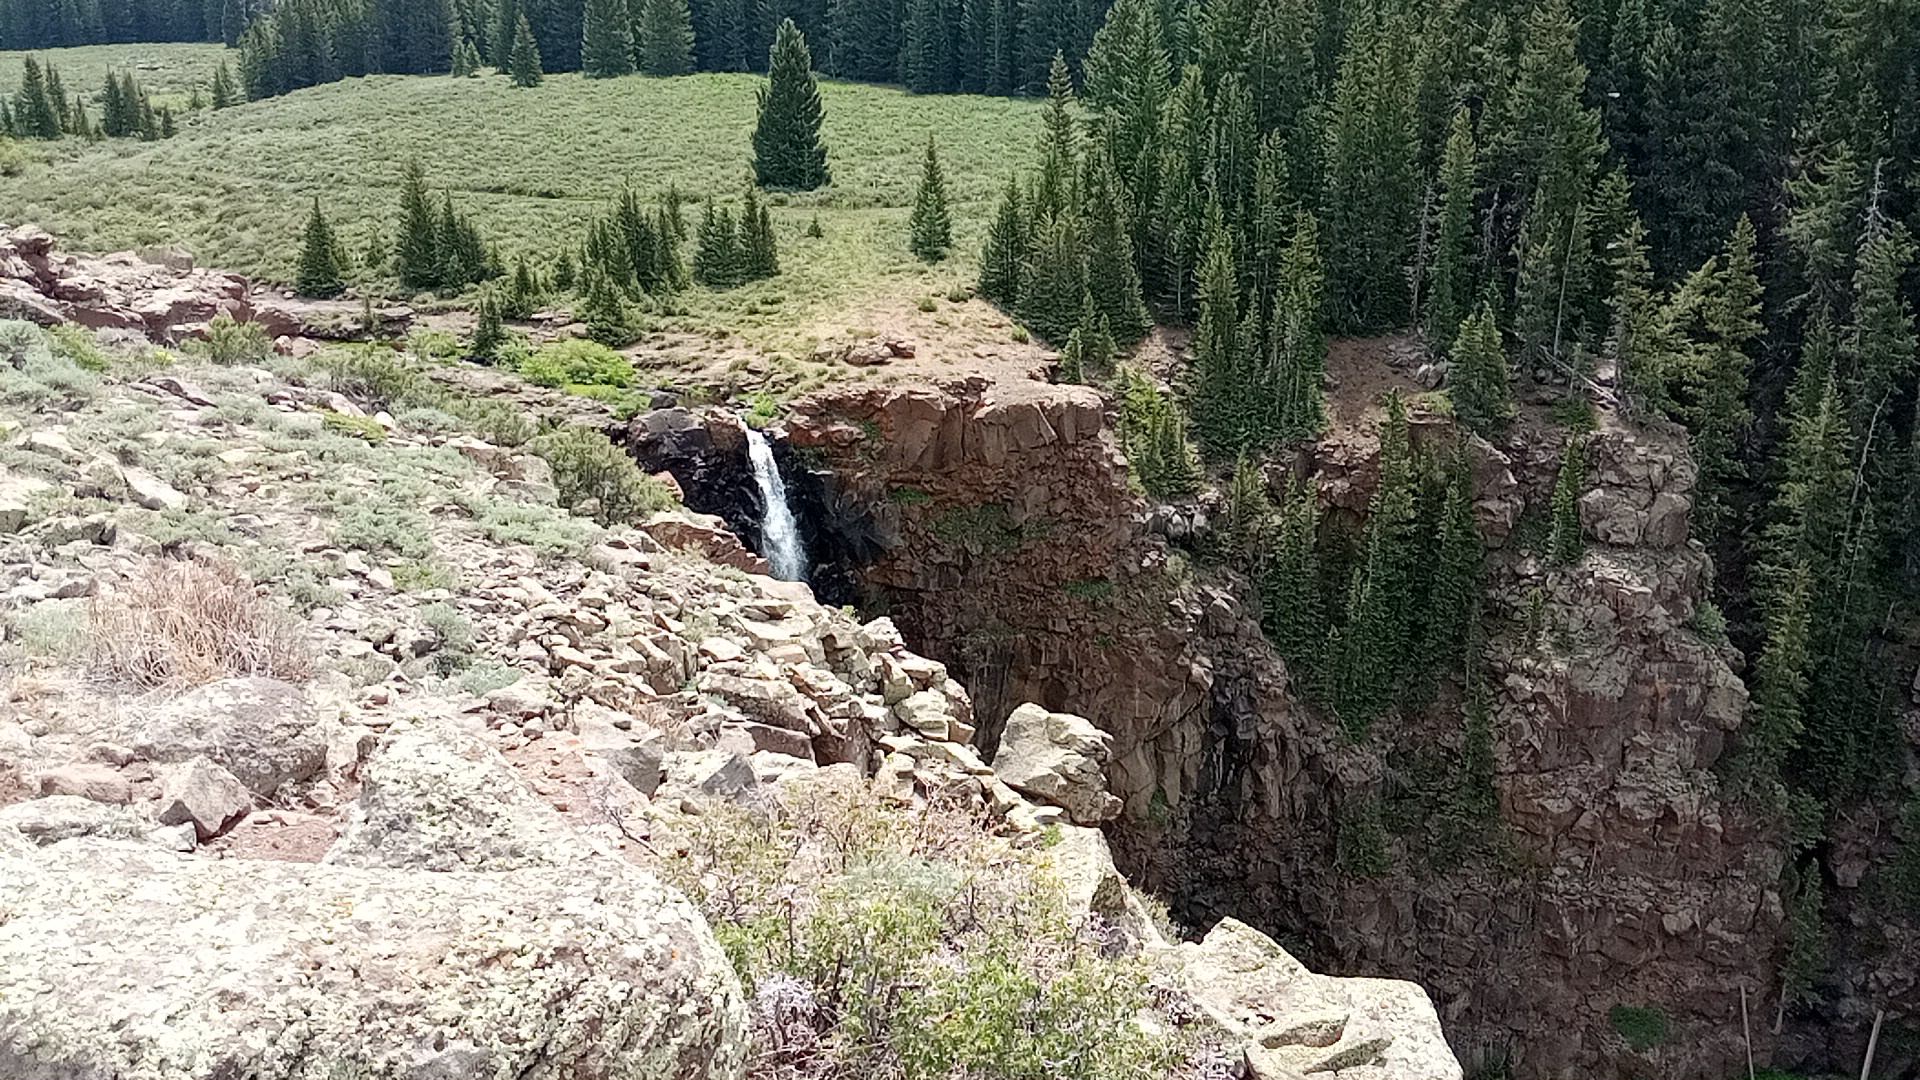 other side of the waterfall